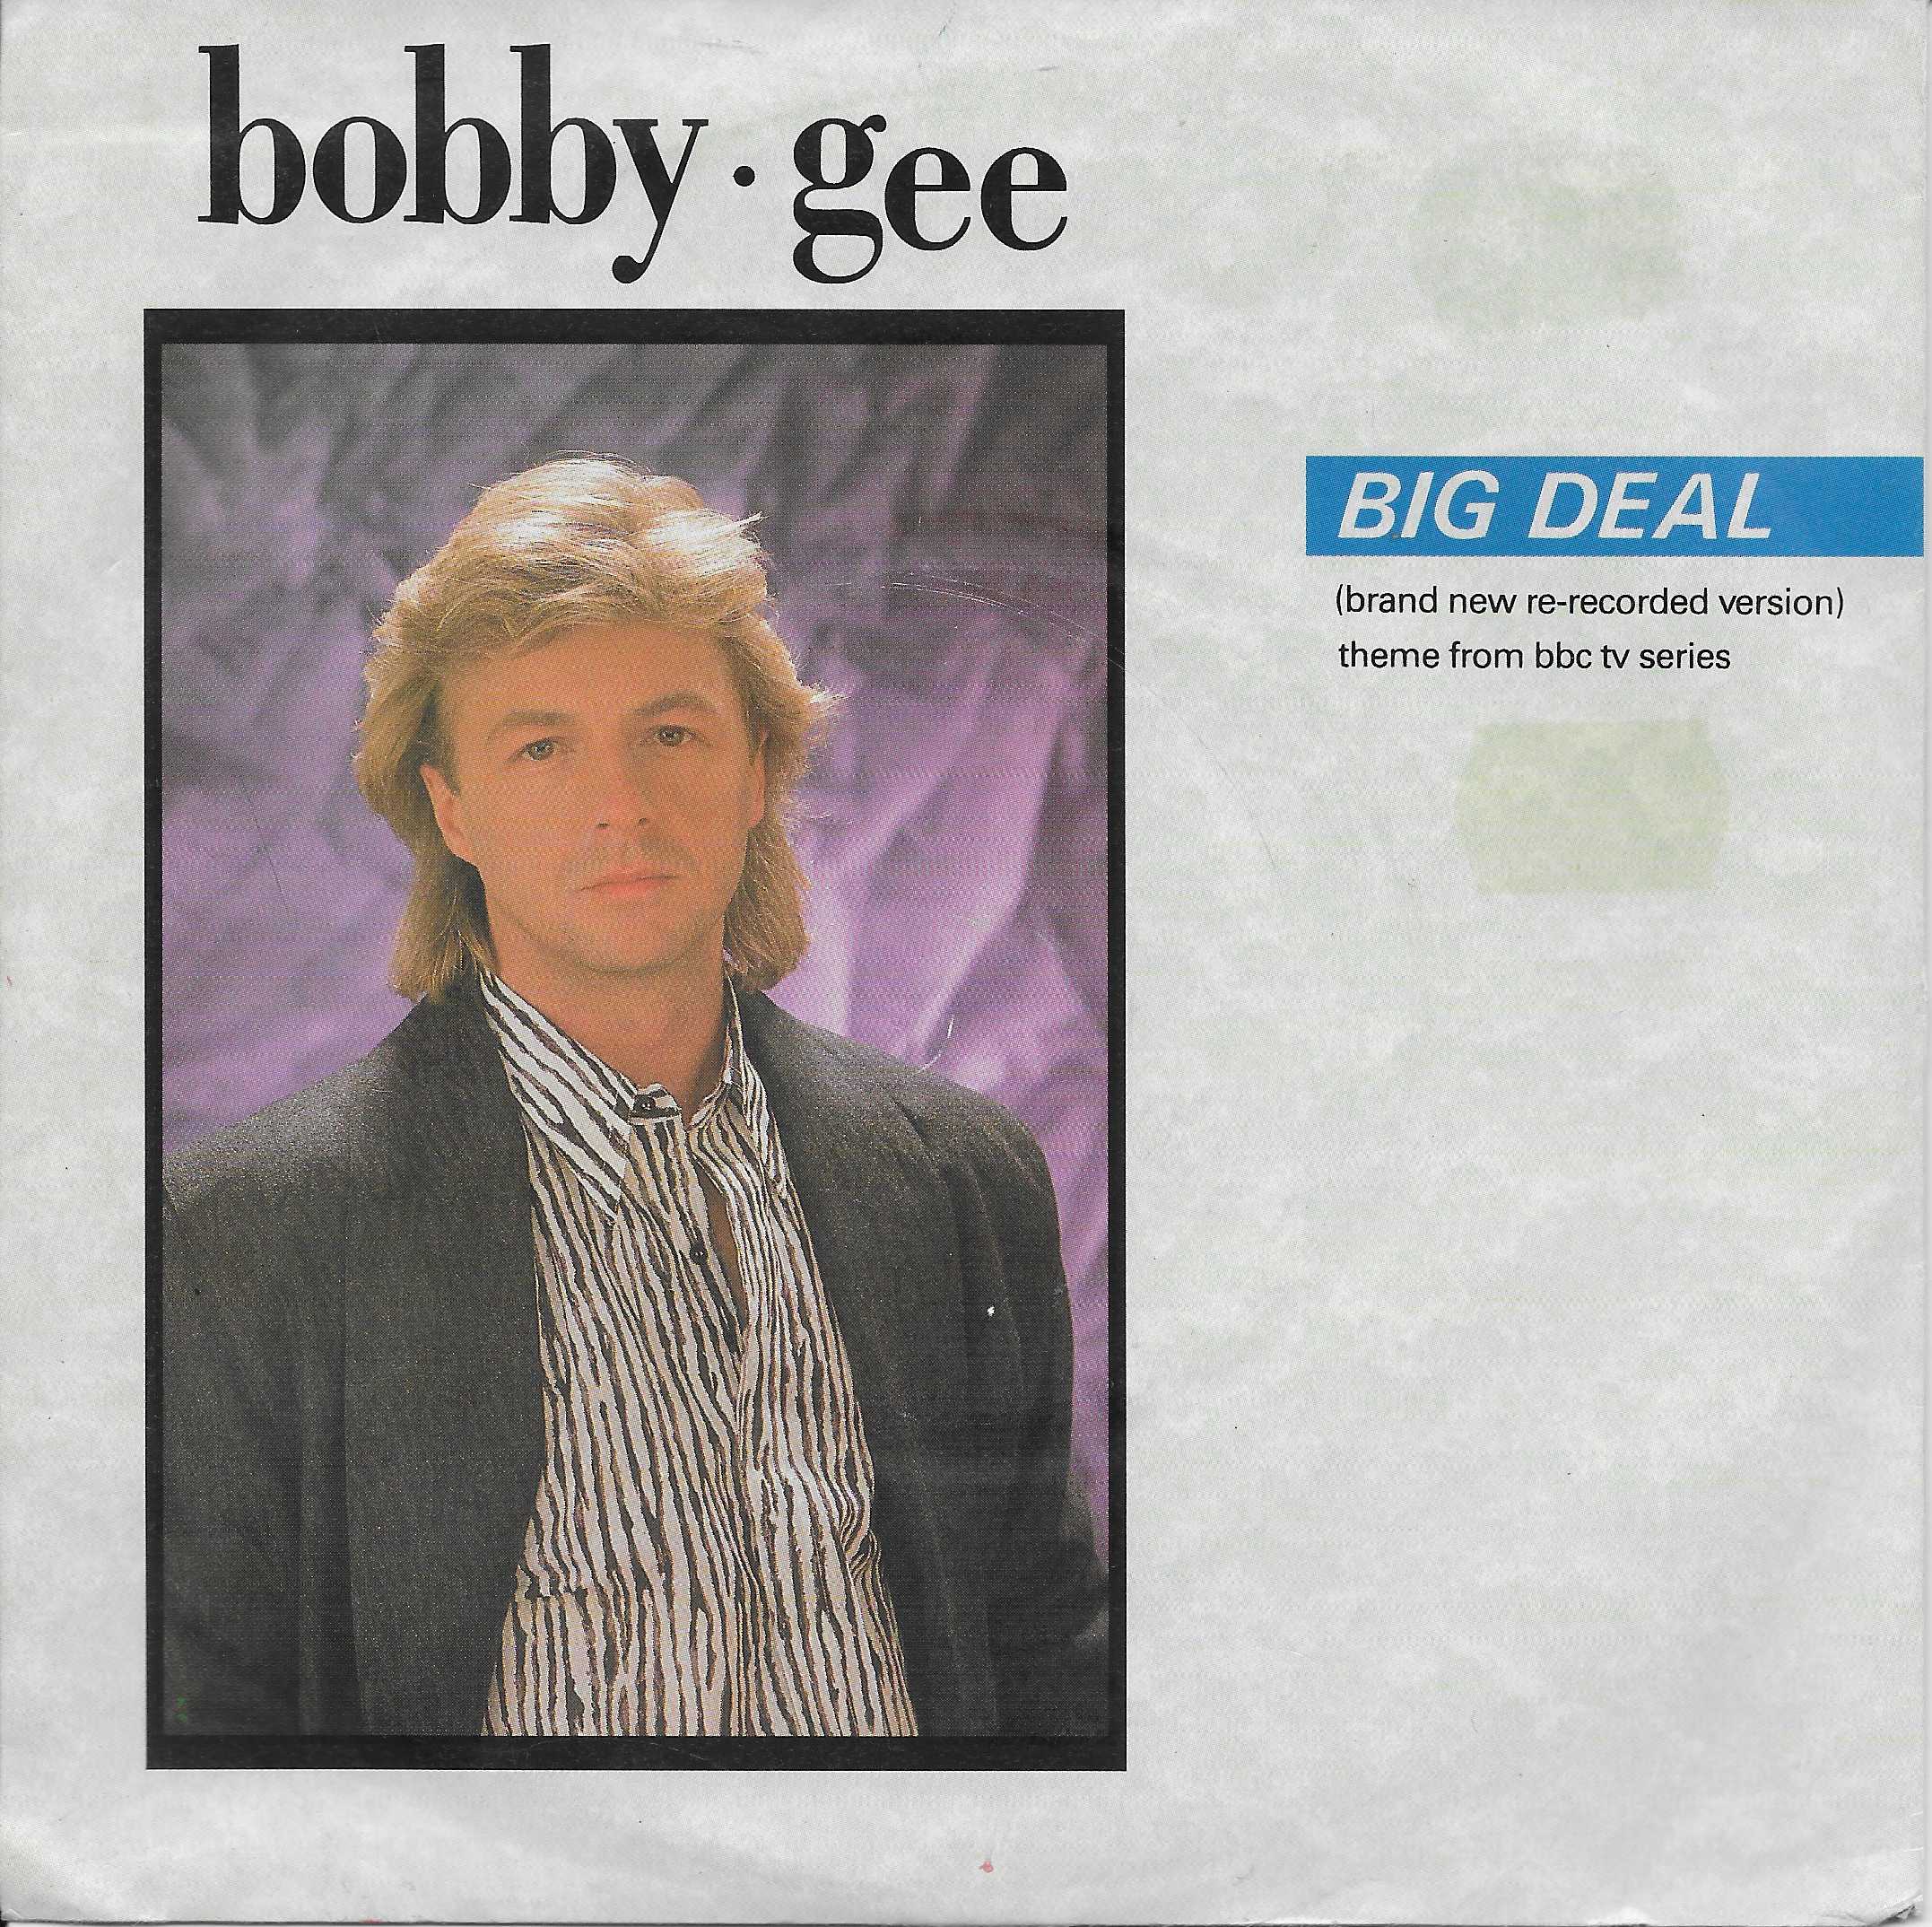 Picture of POSP 810 Big deal by artist Bobby Gee from the BBC records and Tapes library